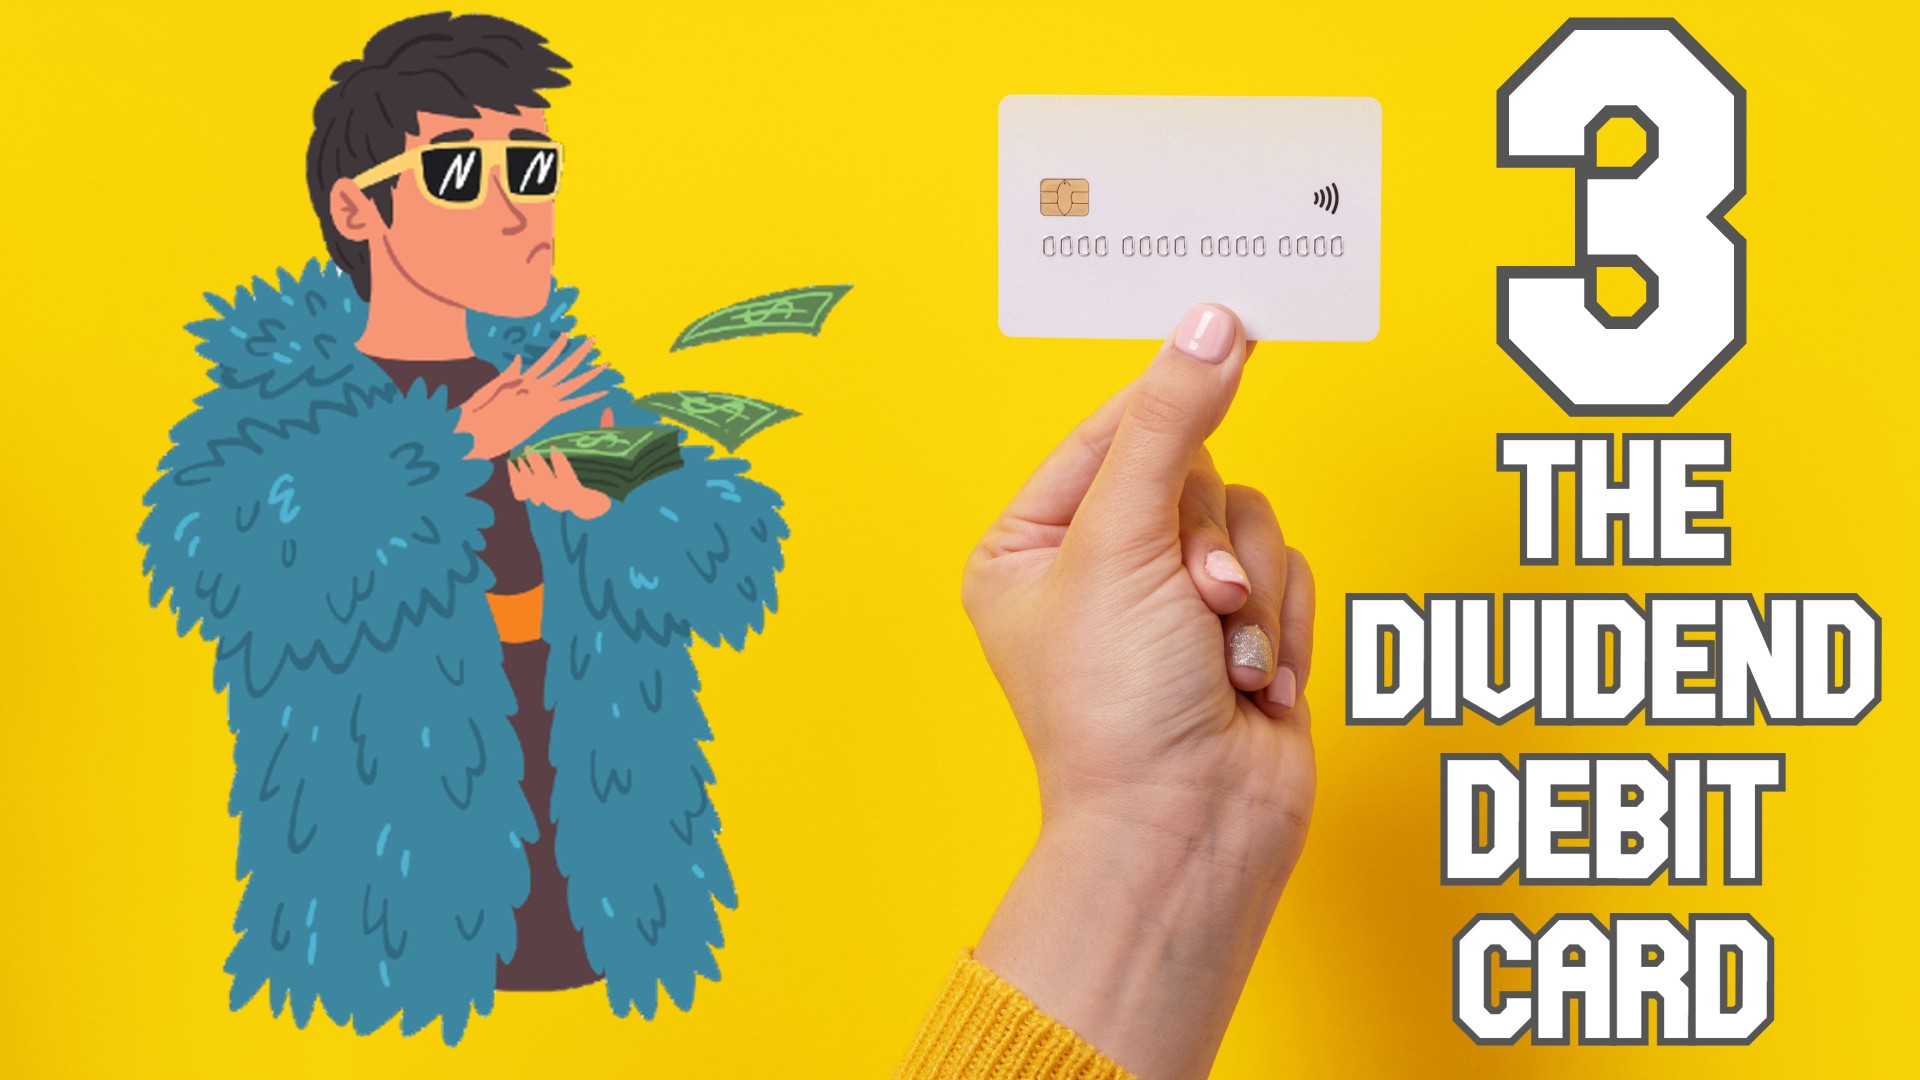 The Dividend Debit Card 3: Dividends in Daily Life